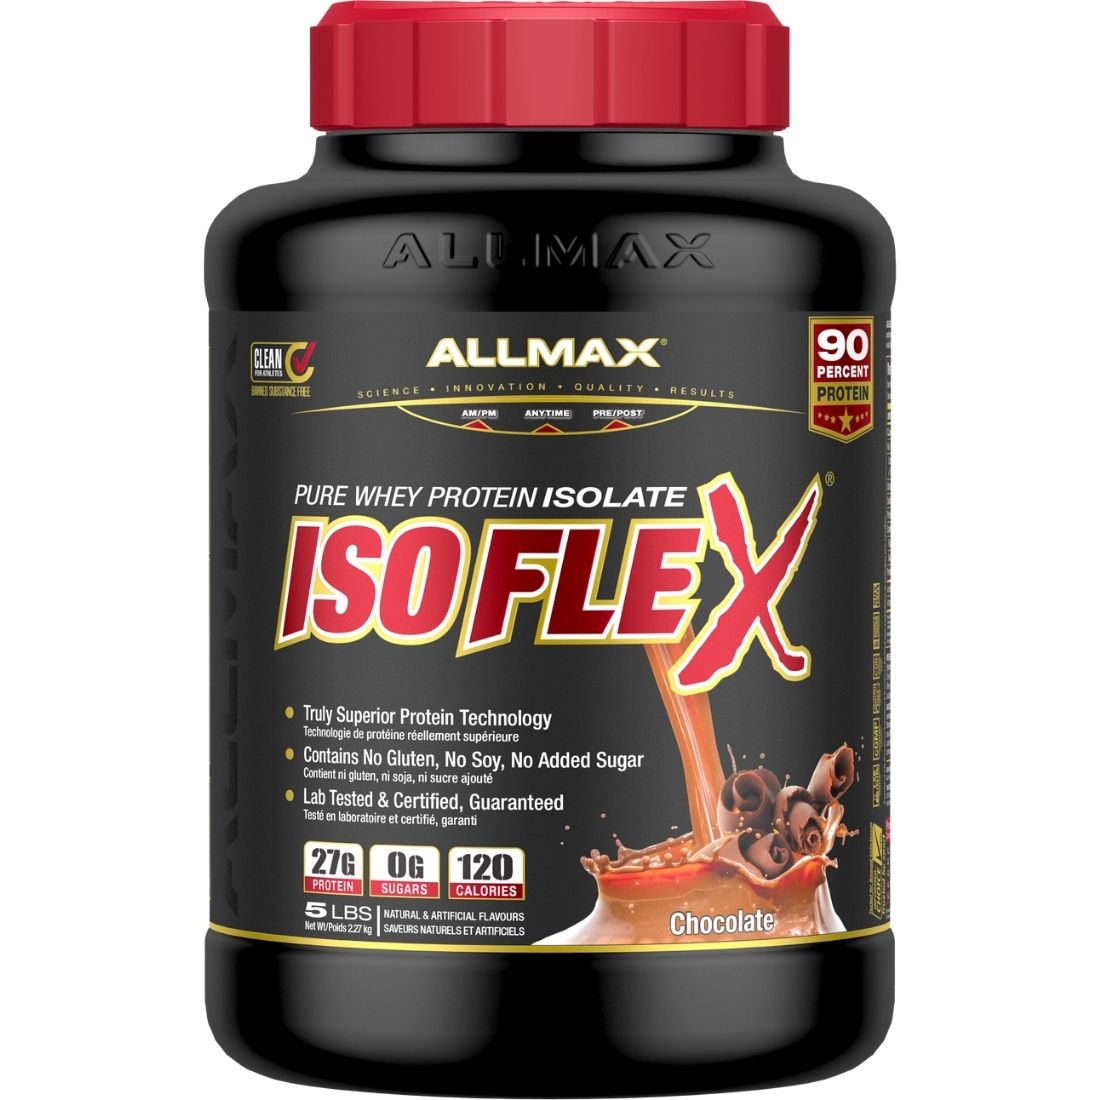 Chocolate 5lb |  | Allmax Pure Whey Protein Isolate Isoflex // Chocolate flavour